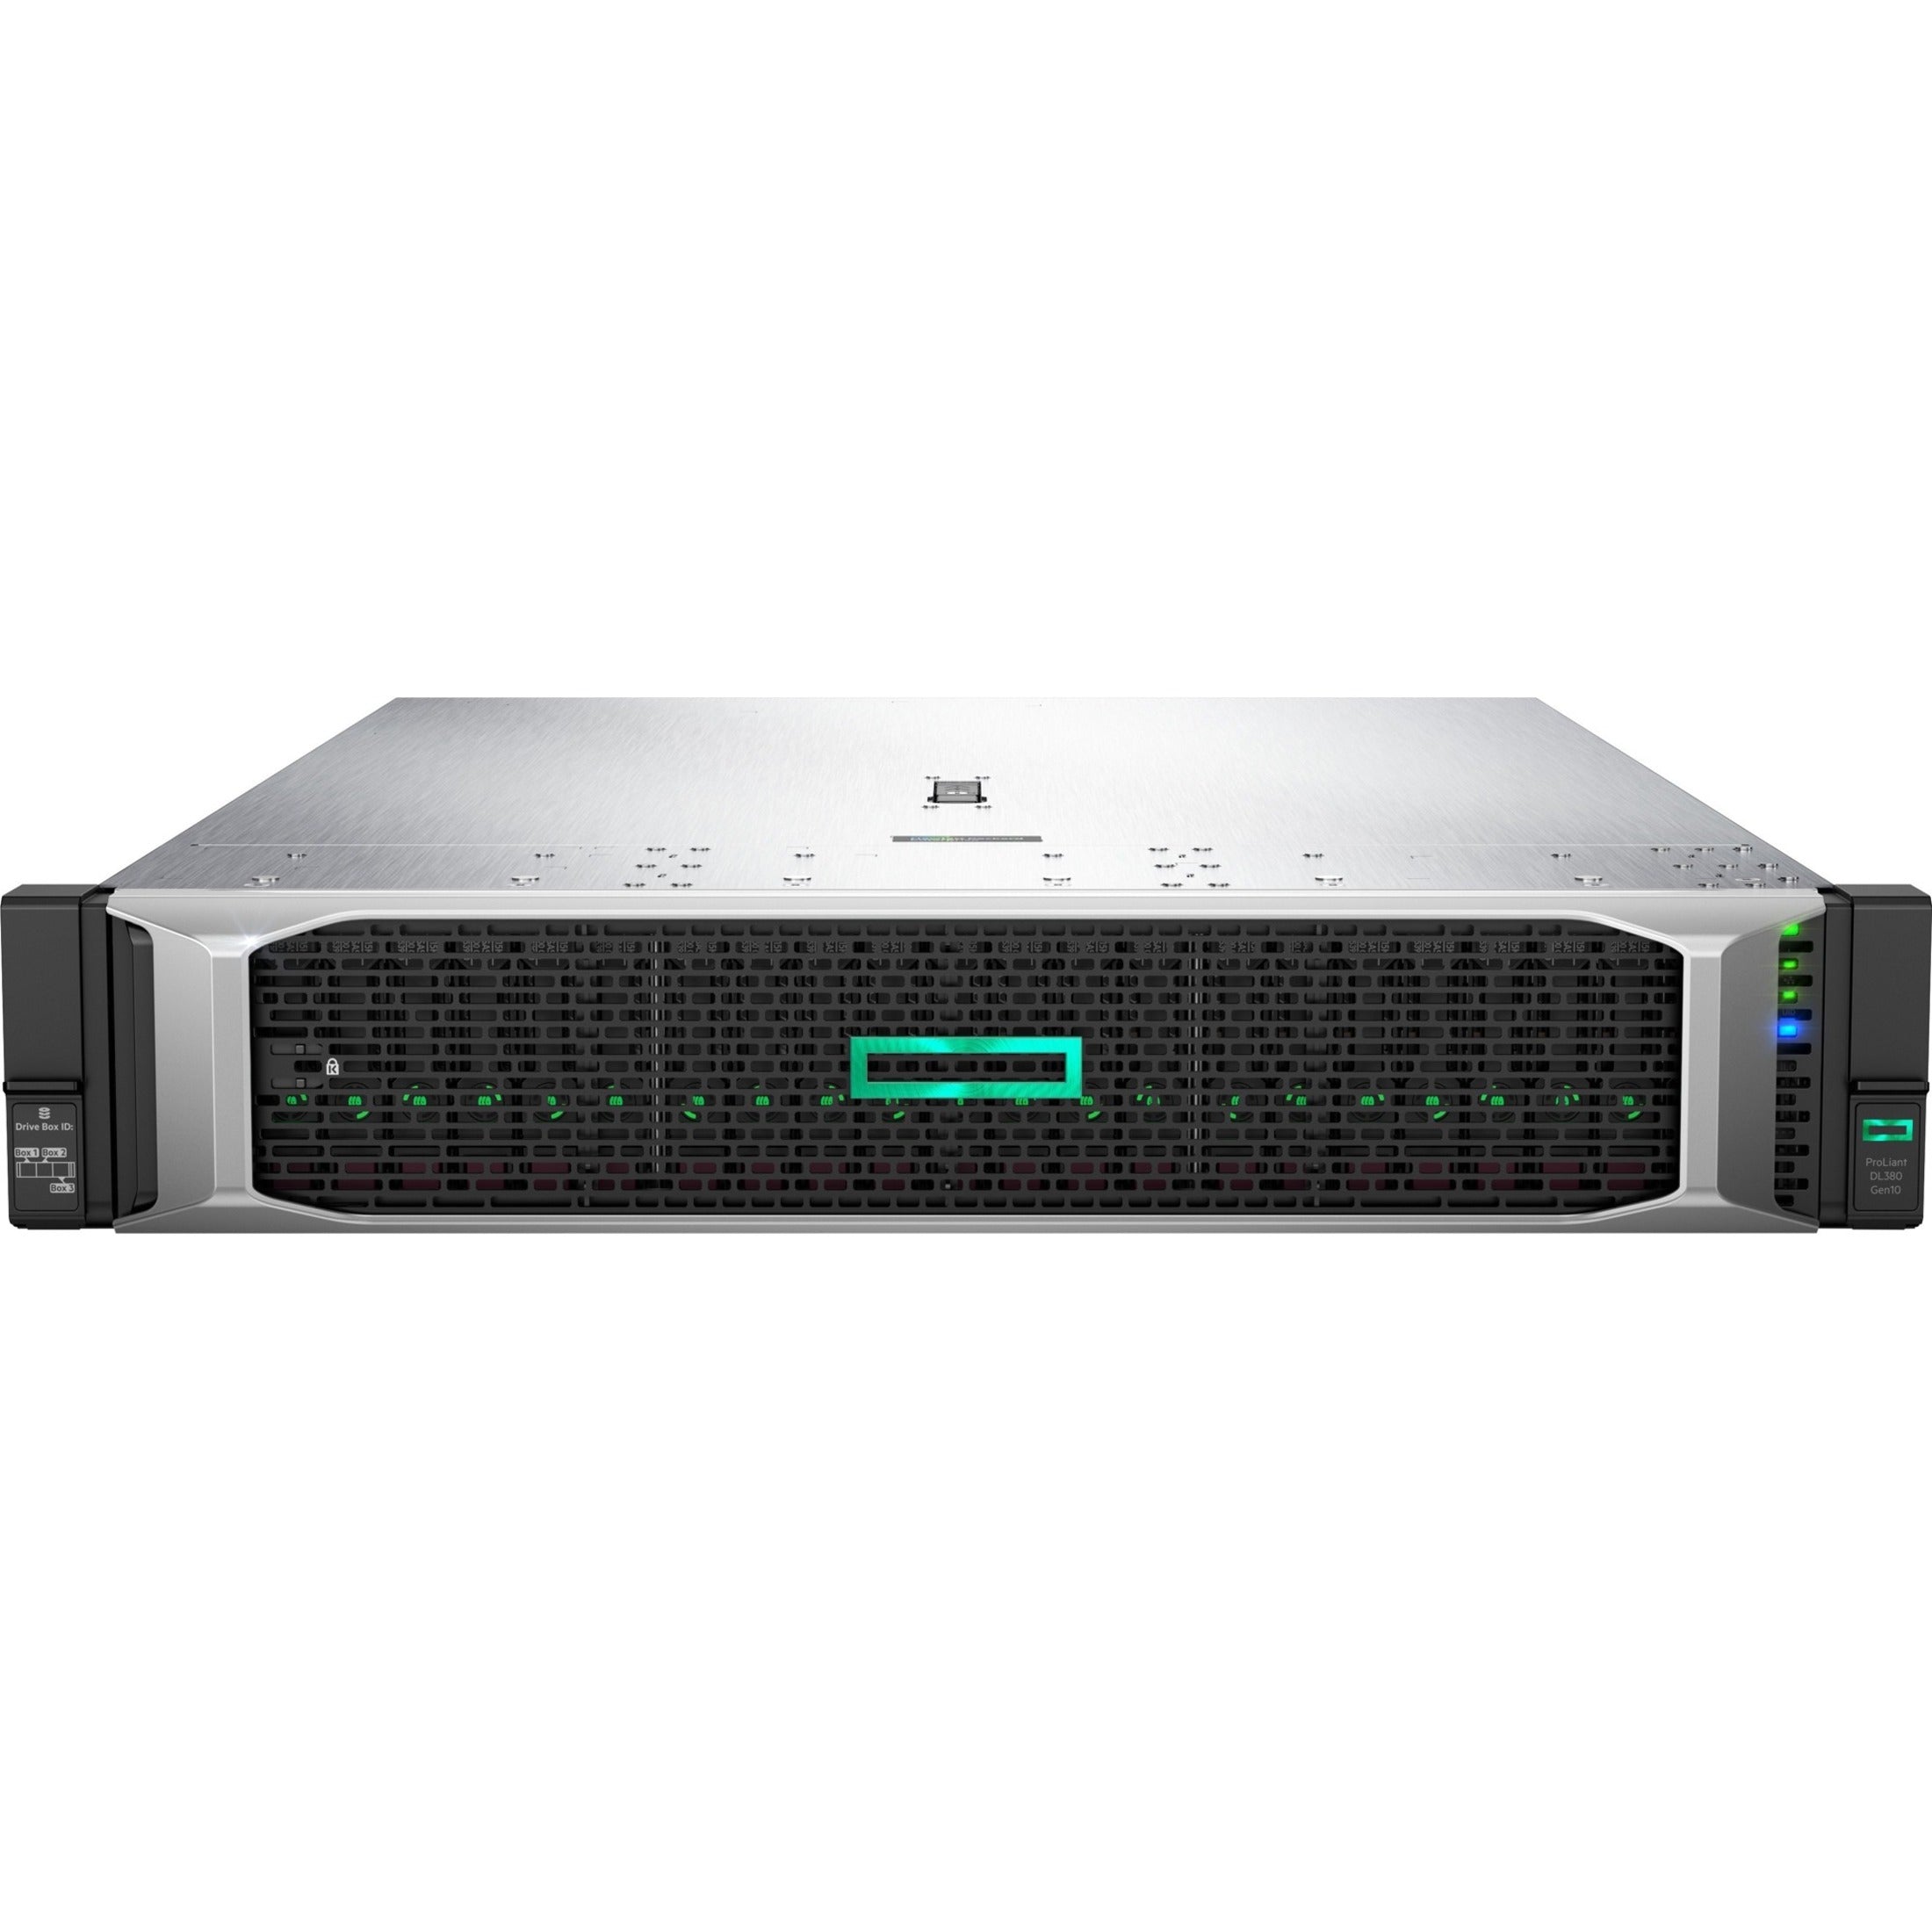 HPE ProLiant DL380 Gen10 4215R 3.2GHz 8-core 1P 32GB-R S100i NC 8SFF 800W PS Server [Discontinued]